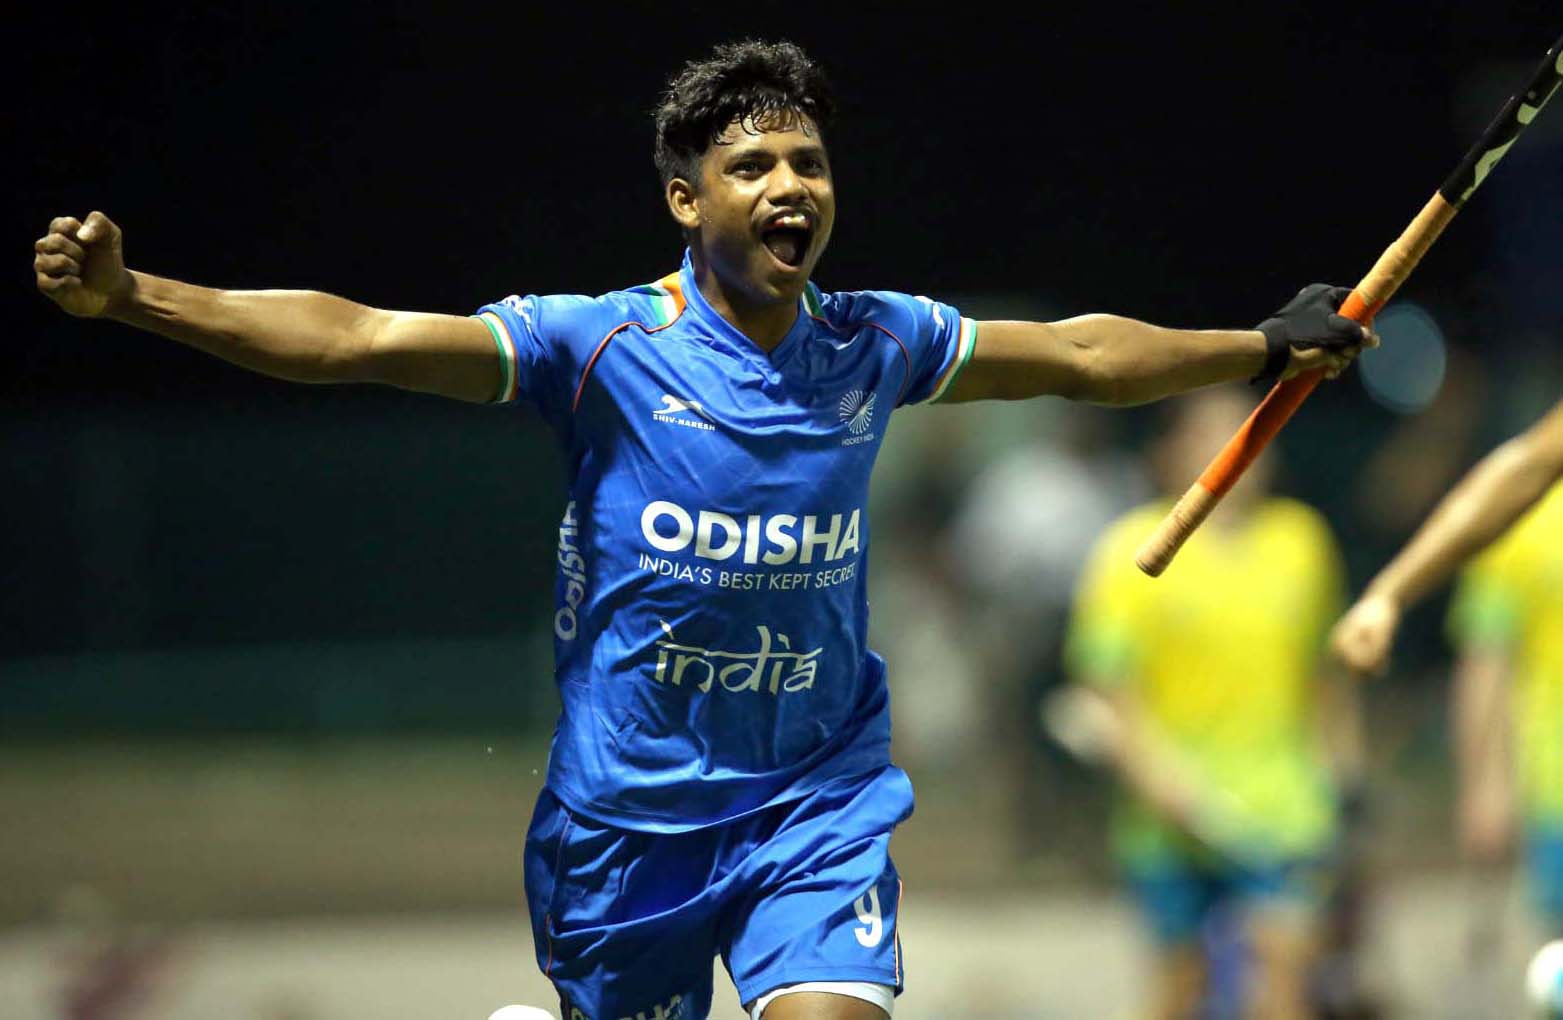 Odisha junior international Sudeep Chirmako celebrates after scoring a goal in final match of the 10th Sultan of Johor Cup Tournament against Australia in Johor Bahru, Malaysia on 29 October 2022.